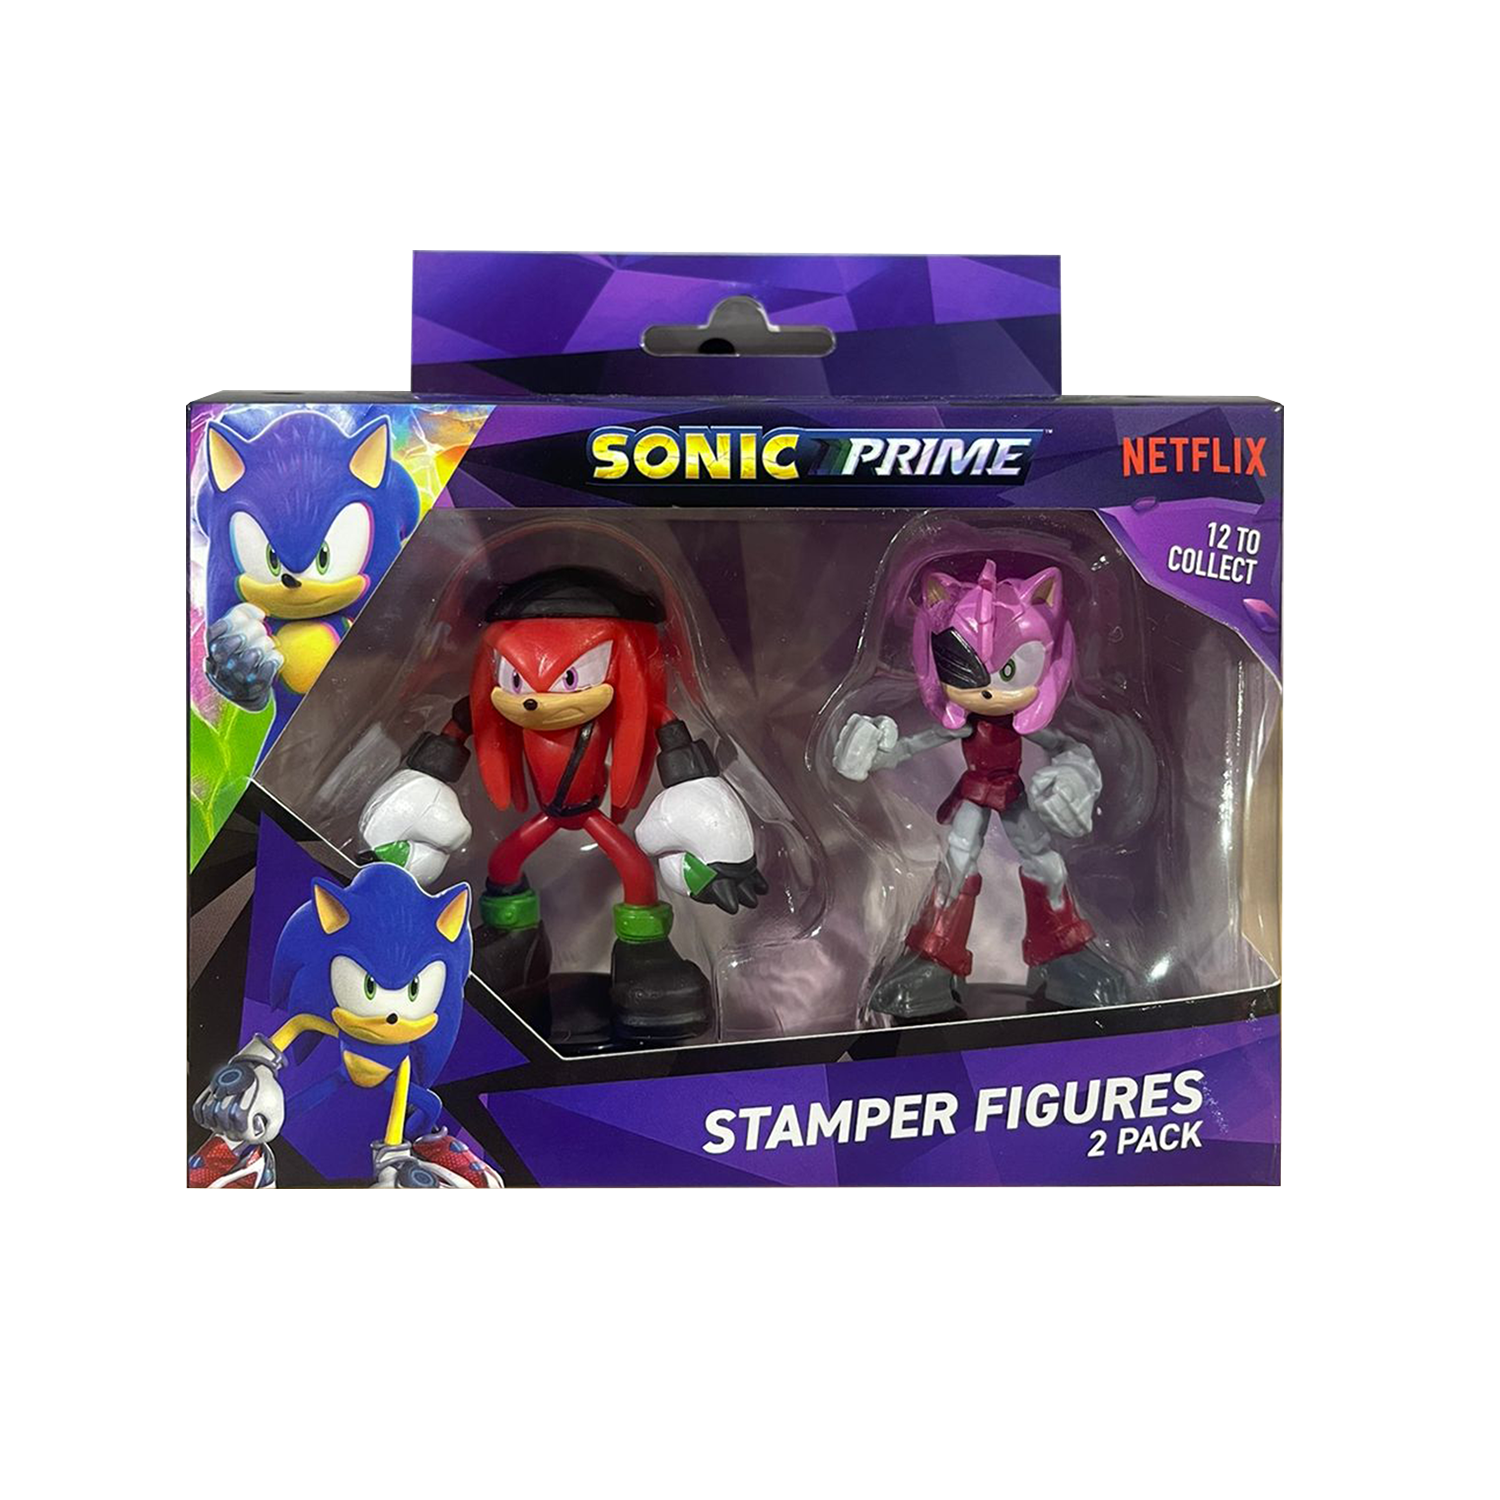 2023 Sonic Prime 12-Pack Deluxe Box Collectible Figures